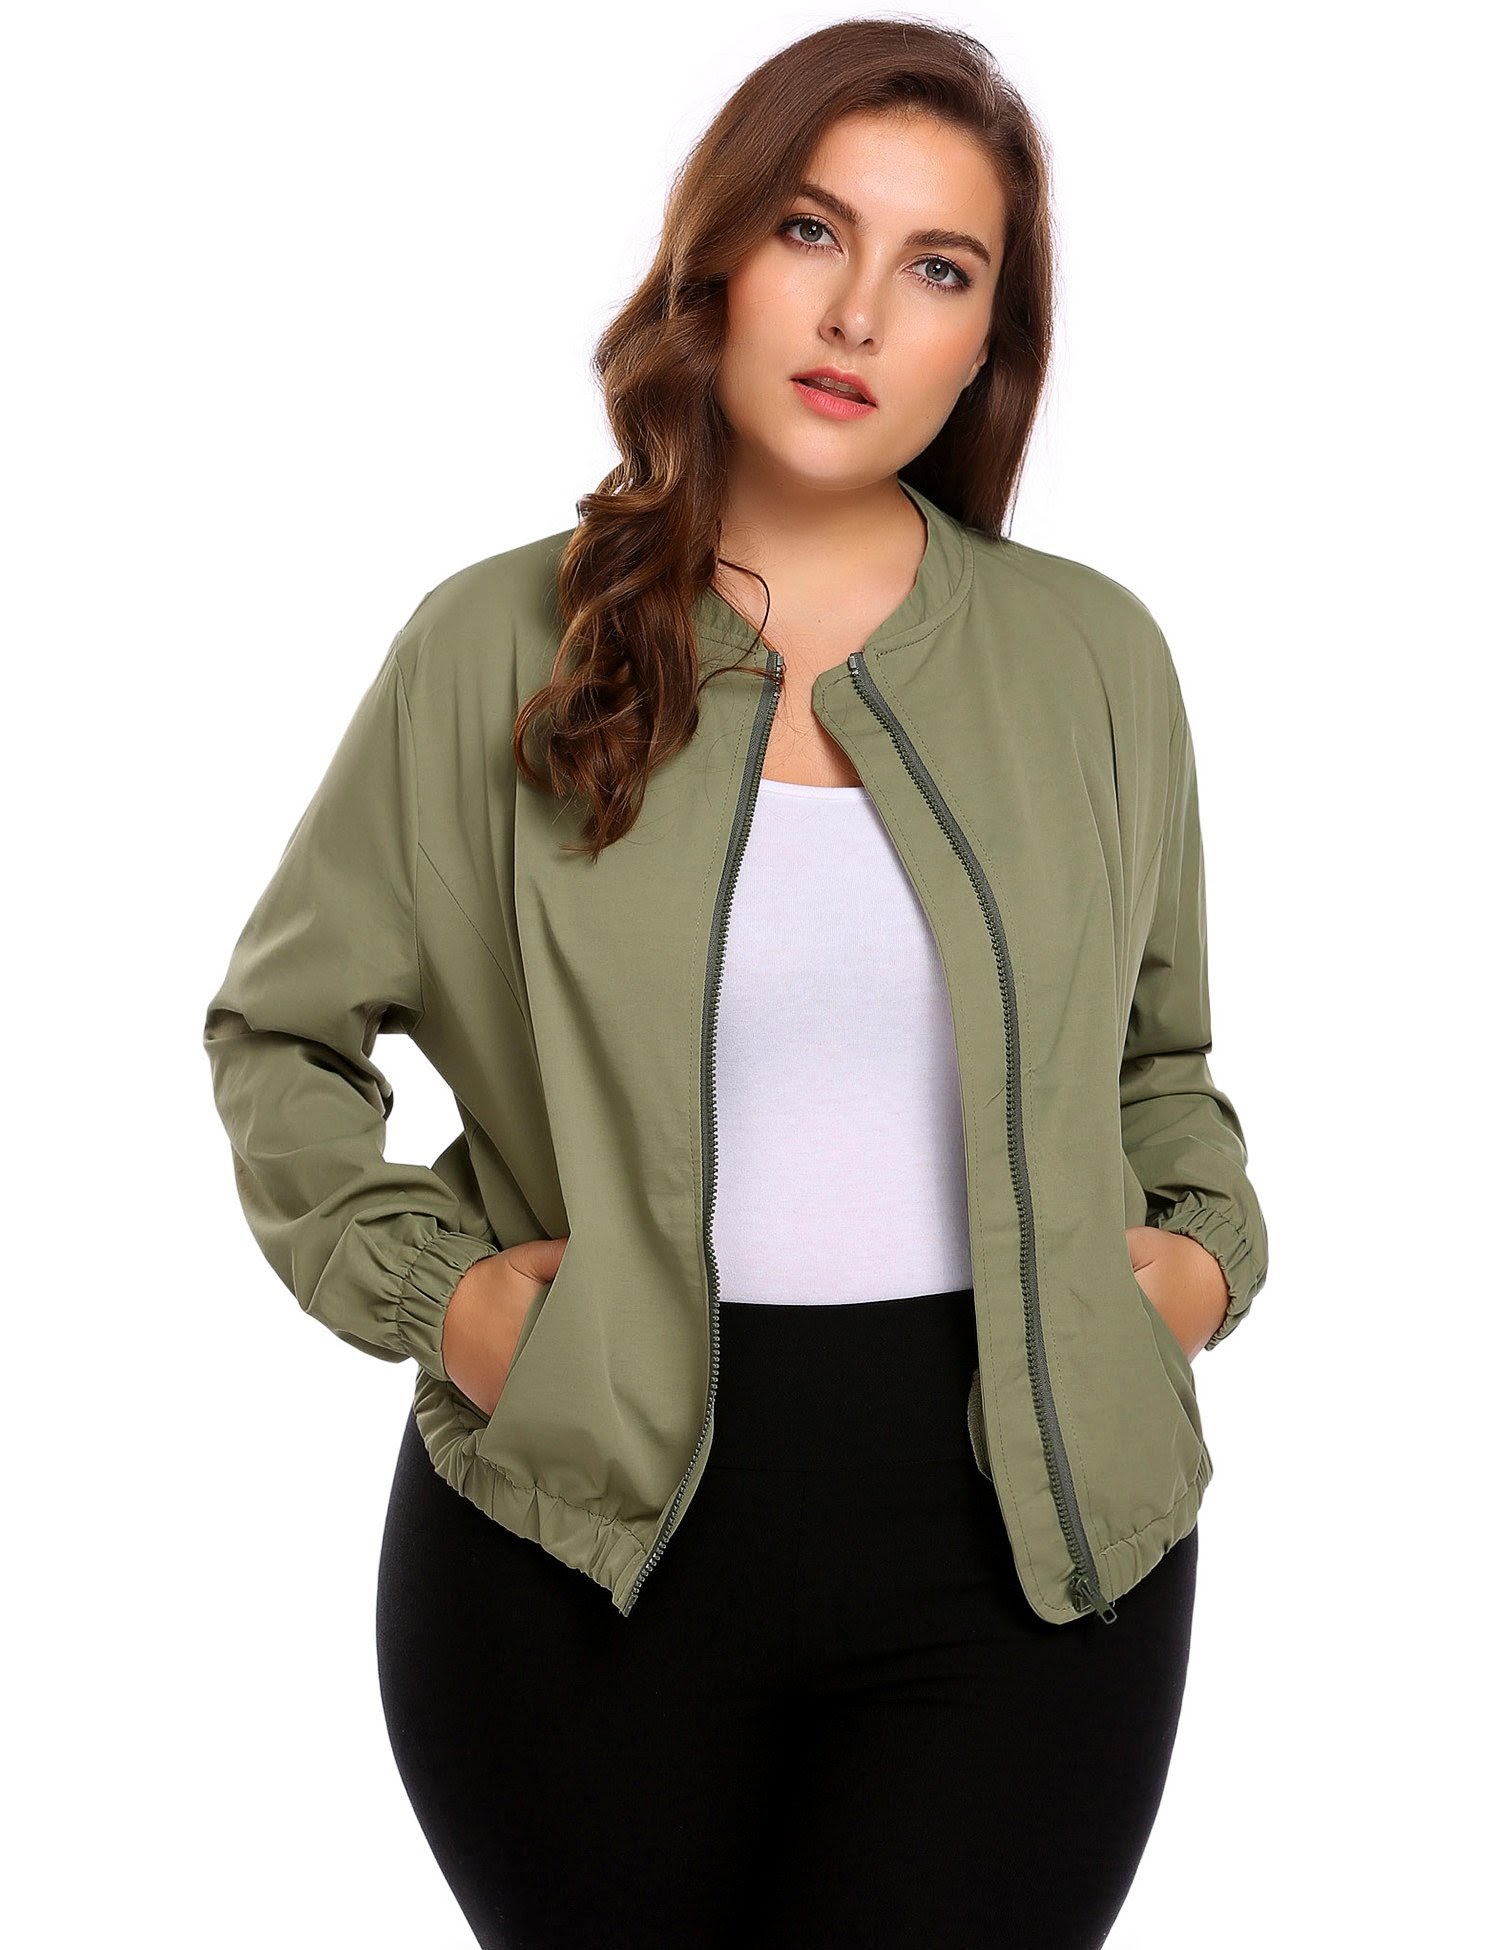 Download 894+ Womens Long Sleeve Bomber Jacket Mockup PSD PNG Include